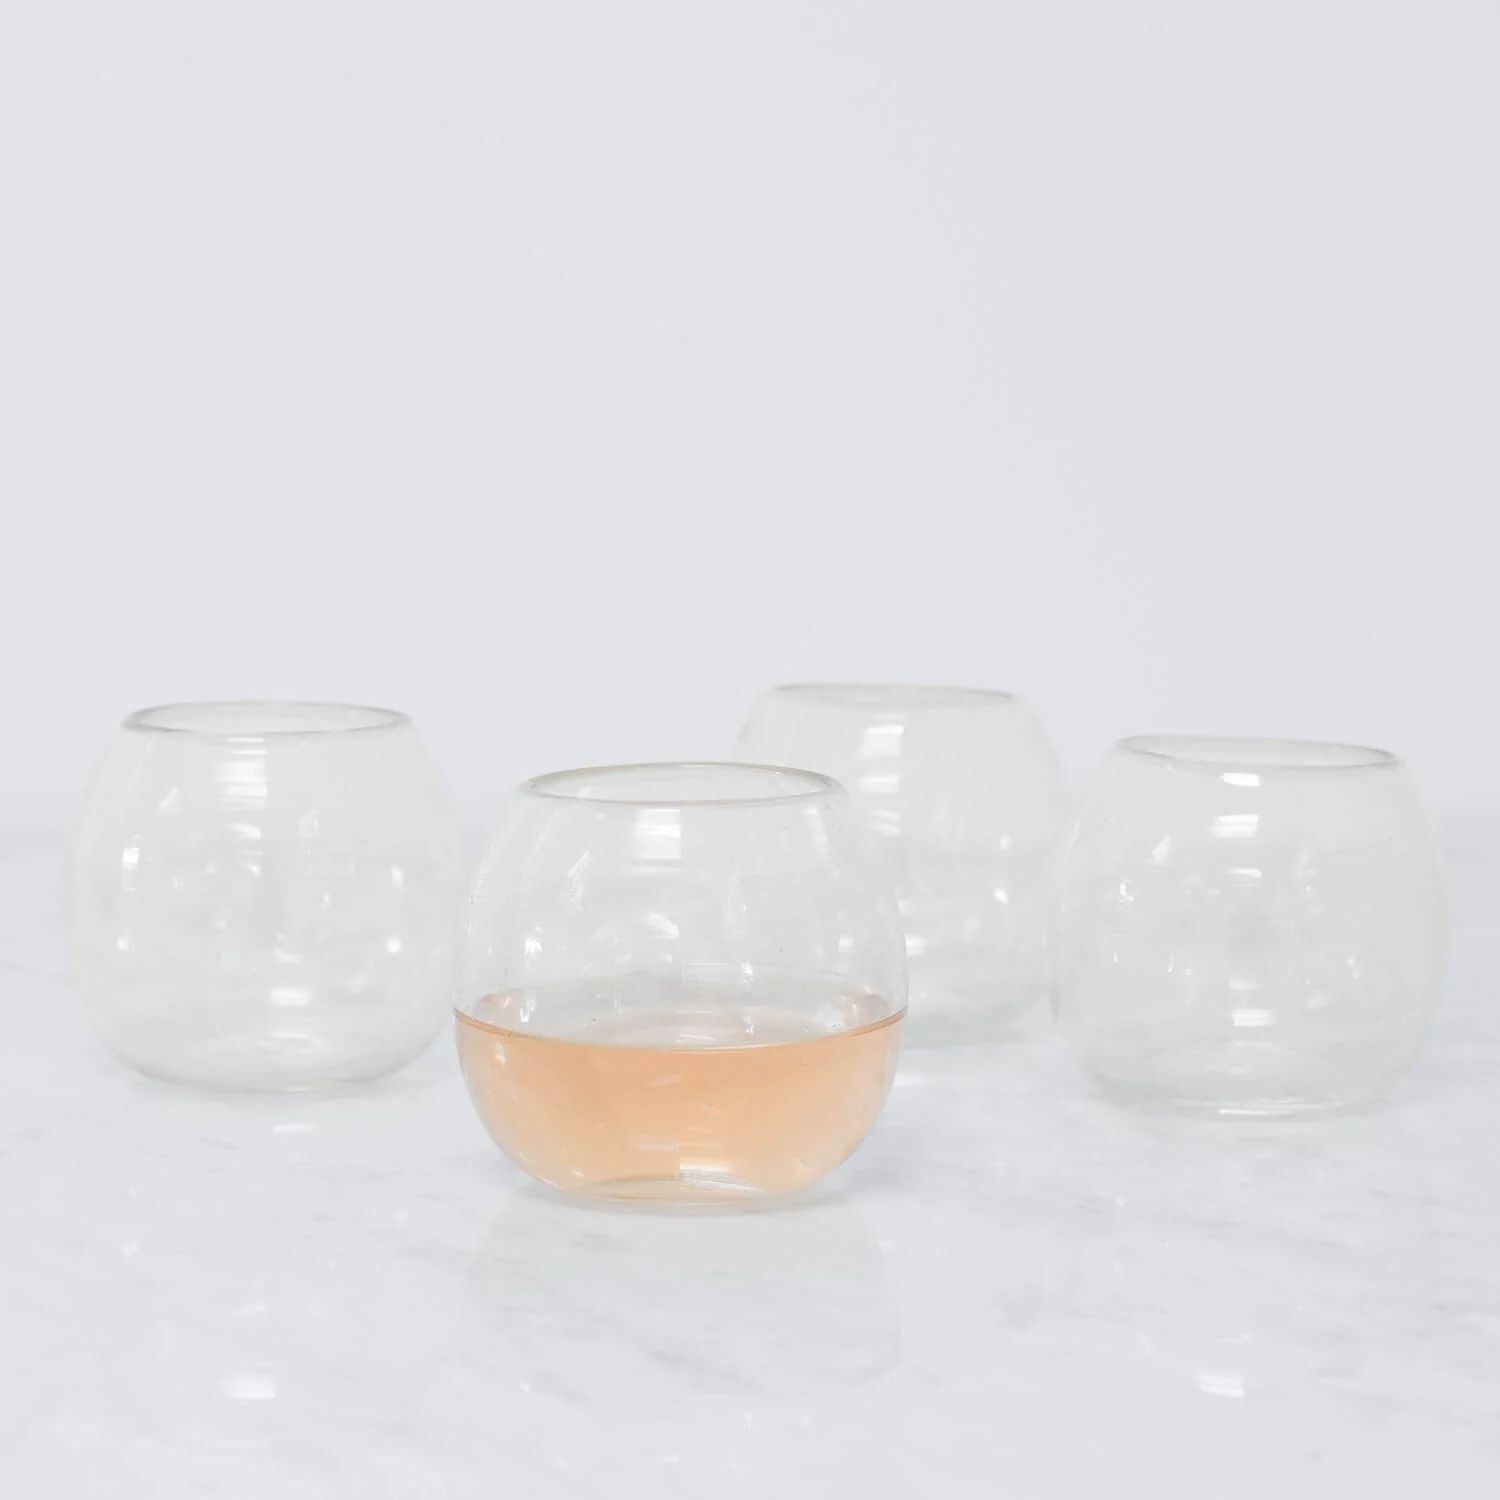 Apasco Cocktail Glasses - Clear - Set of 4 | The Citizenry